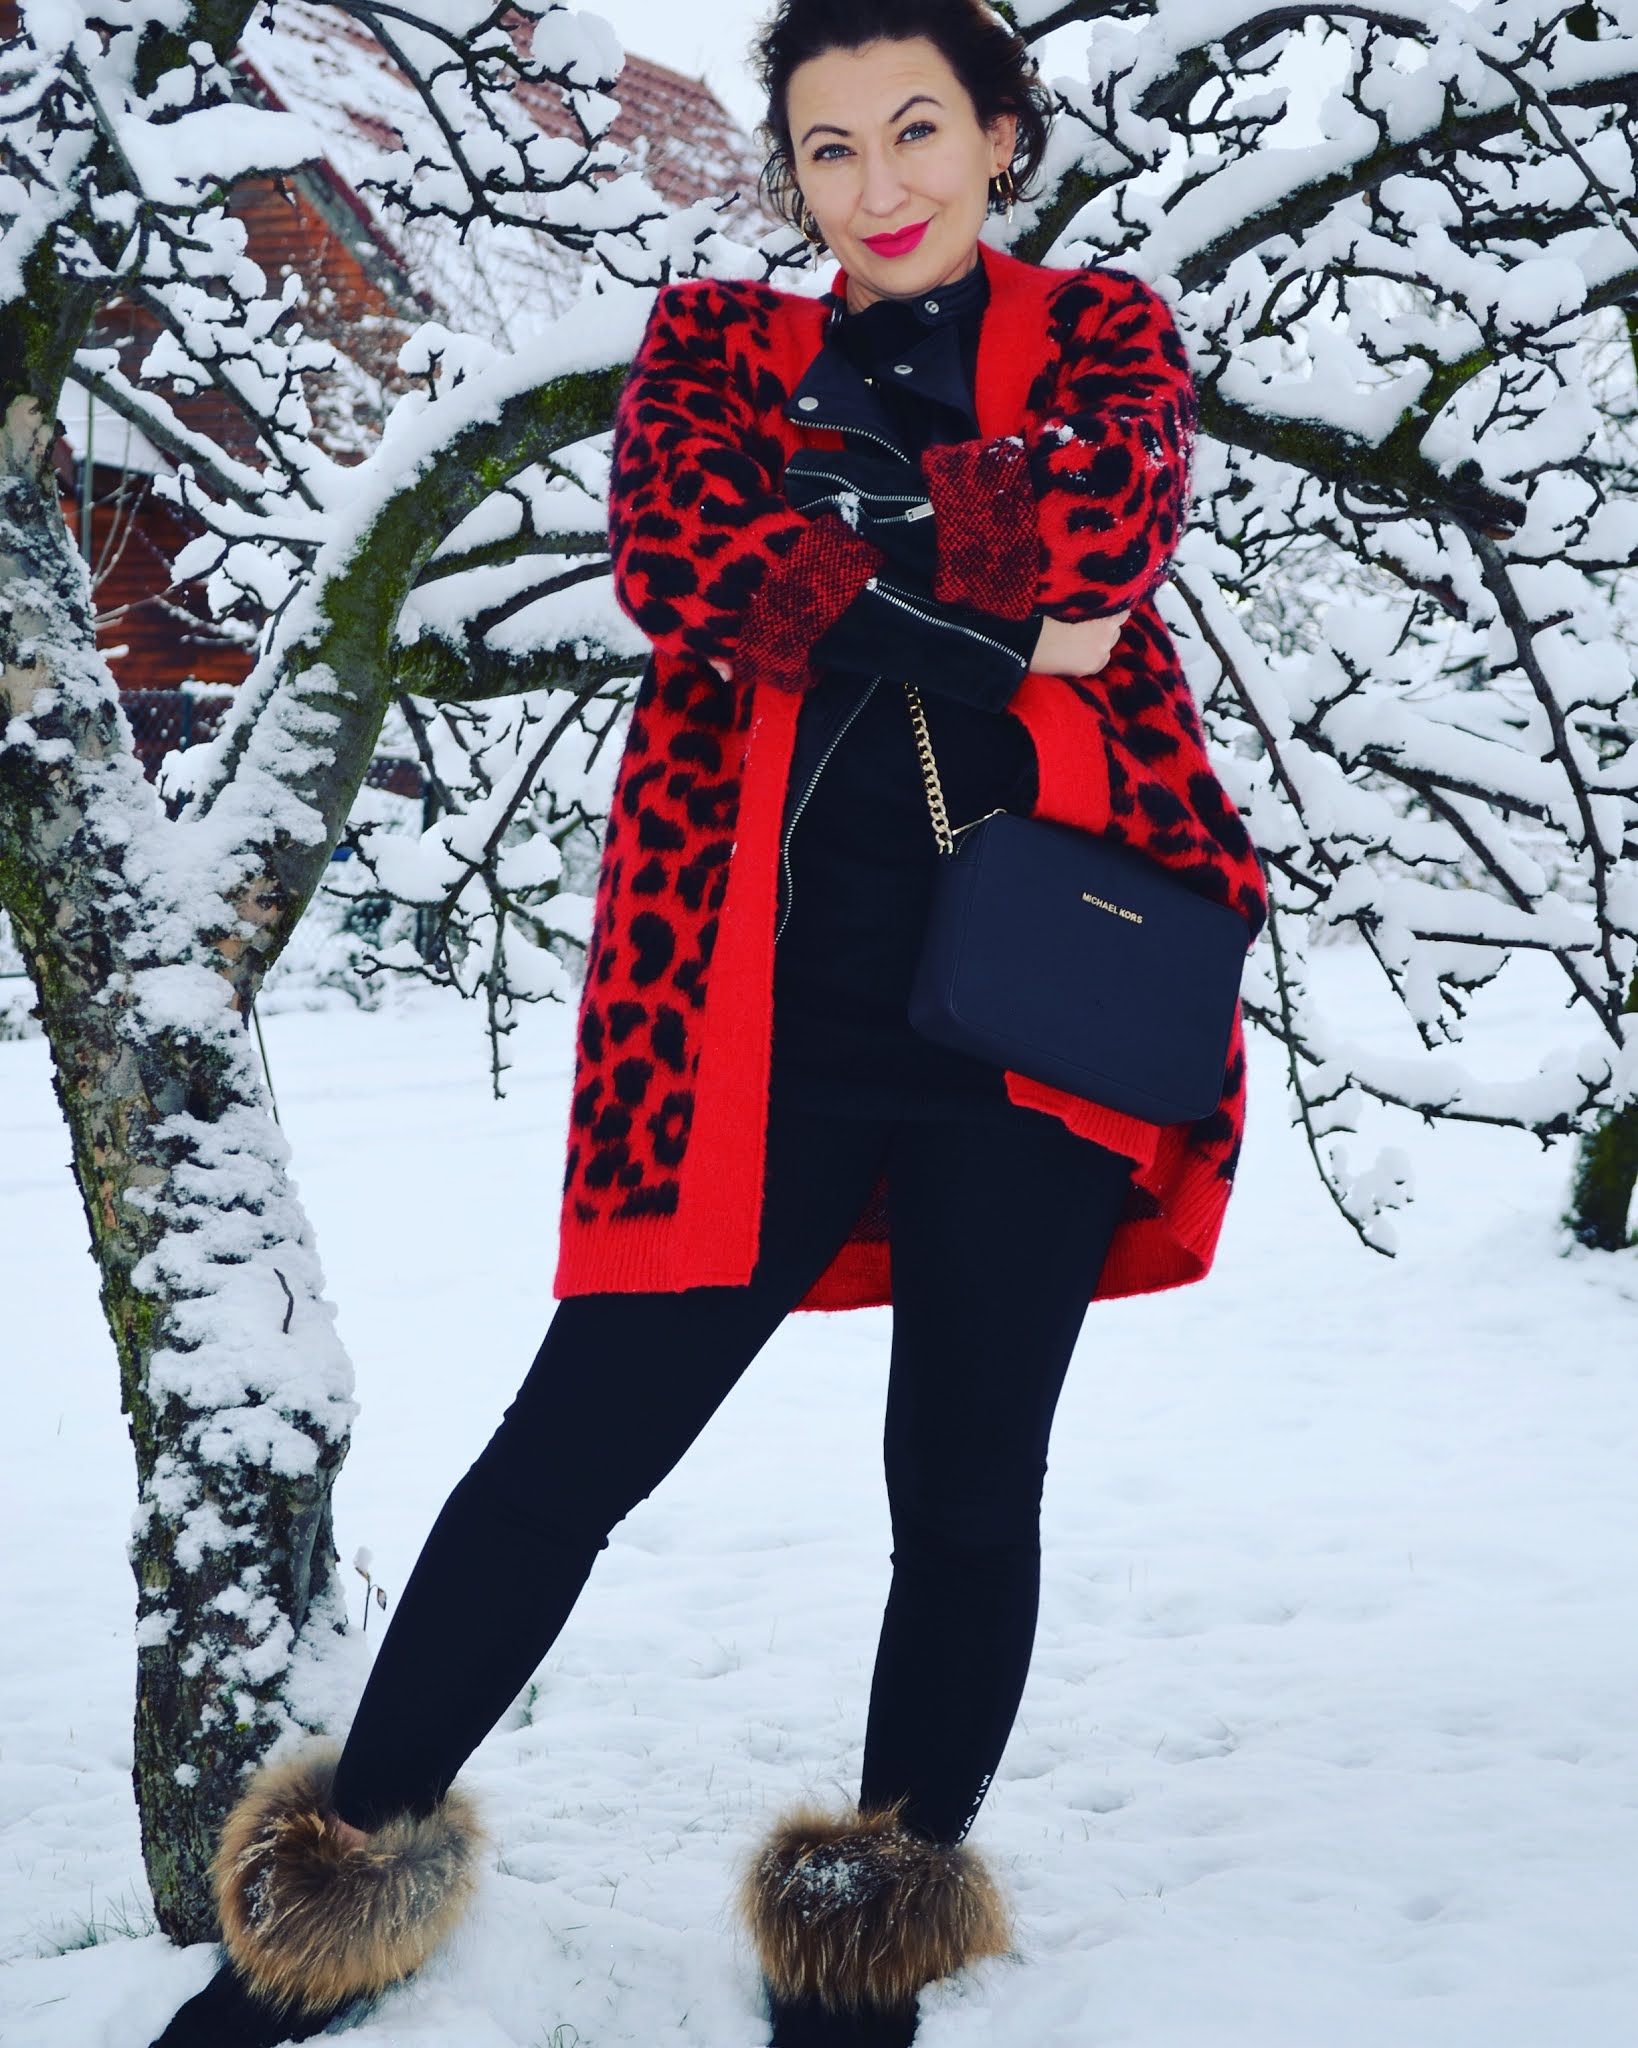 Perfect Winter Outfit in Black & Red